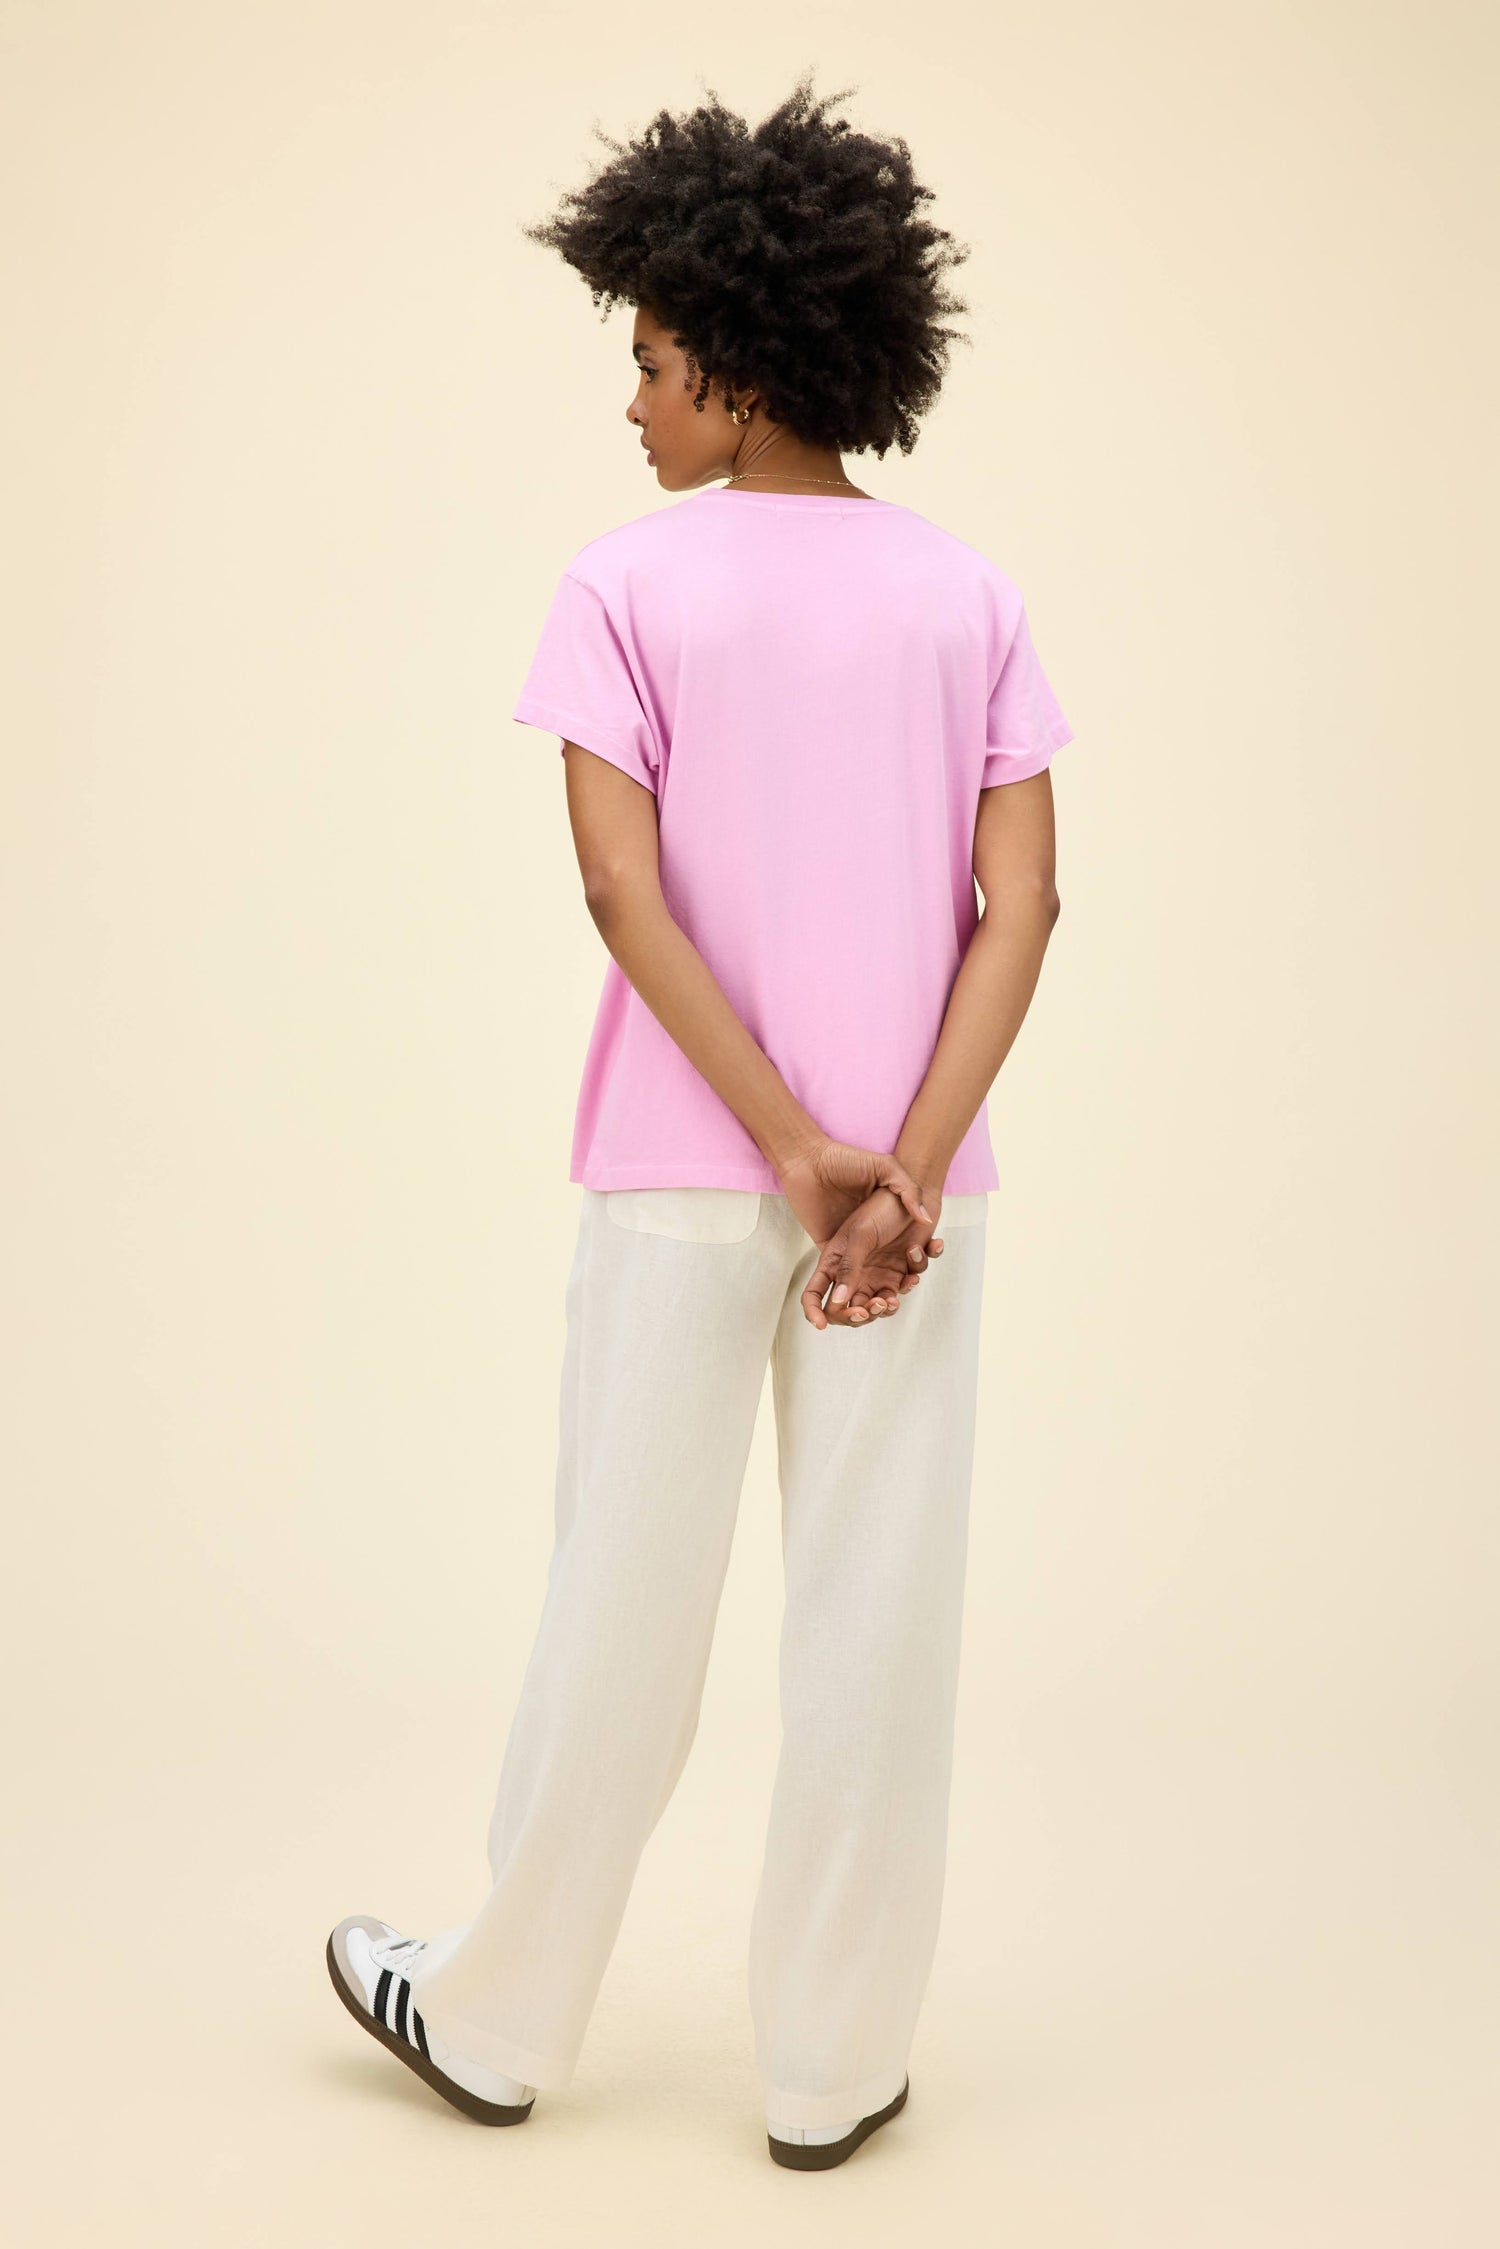 A model featuring a tour tee in faded lilac.